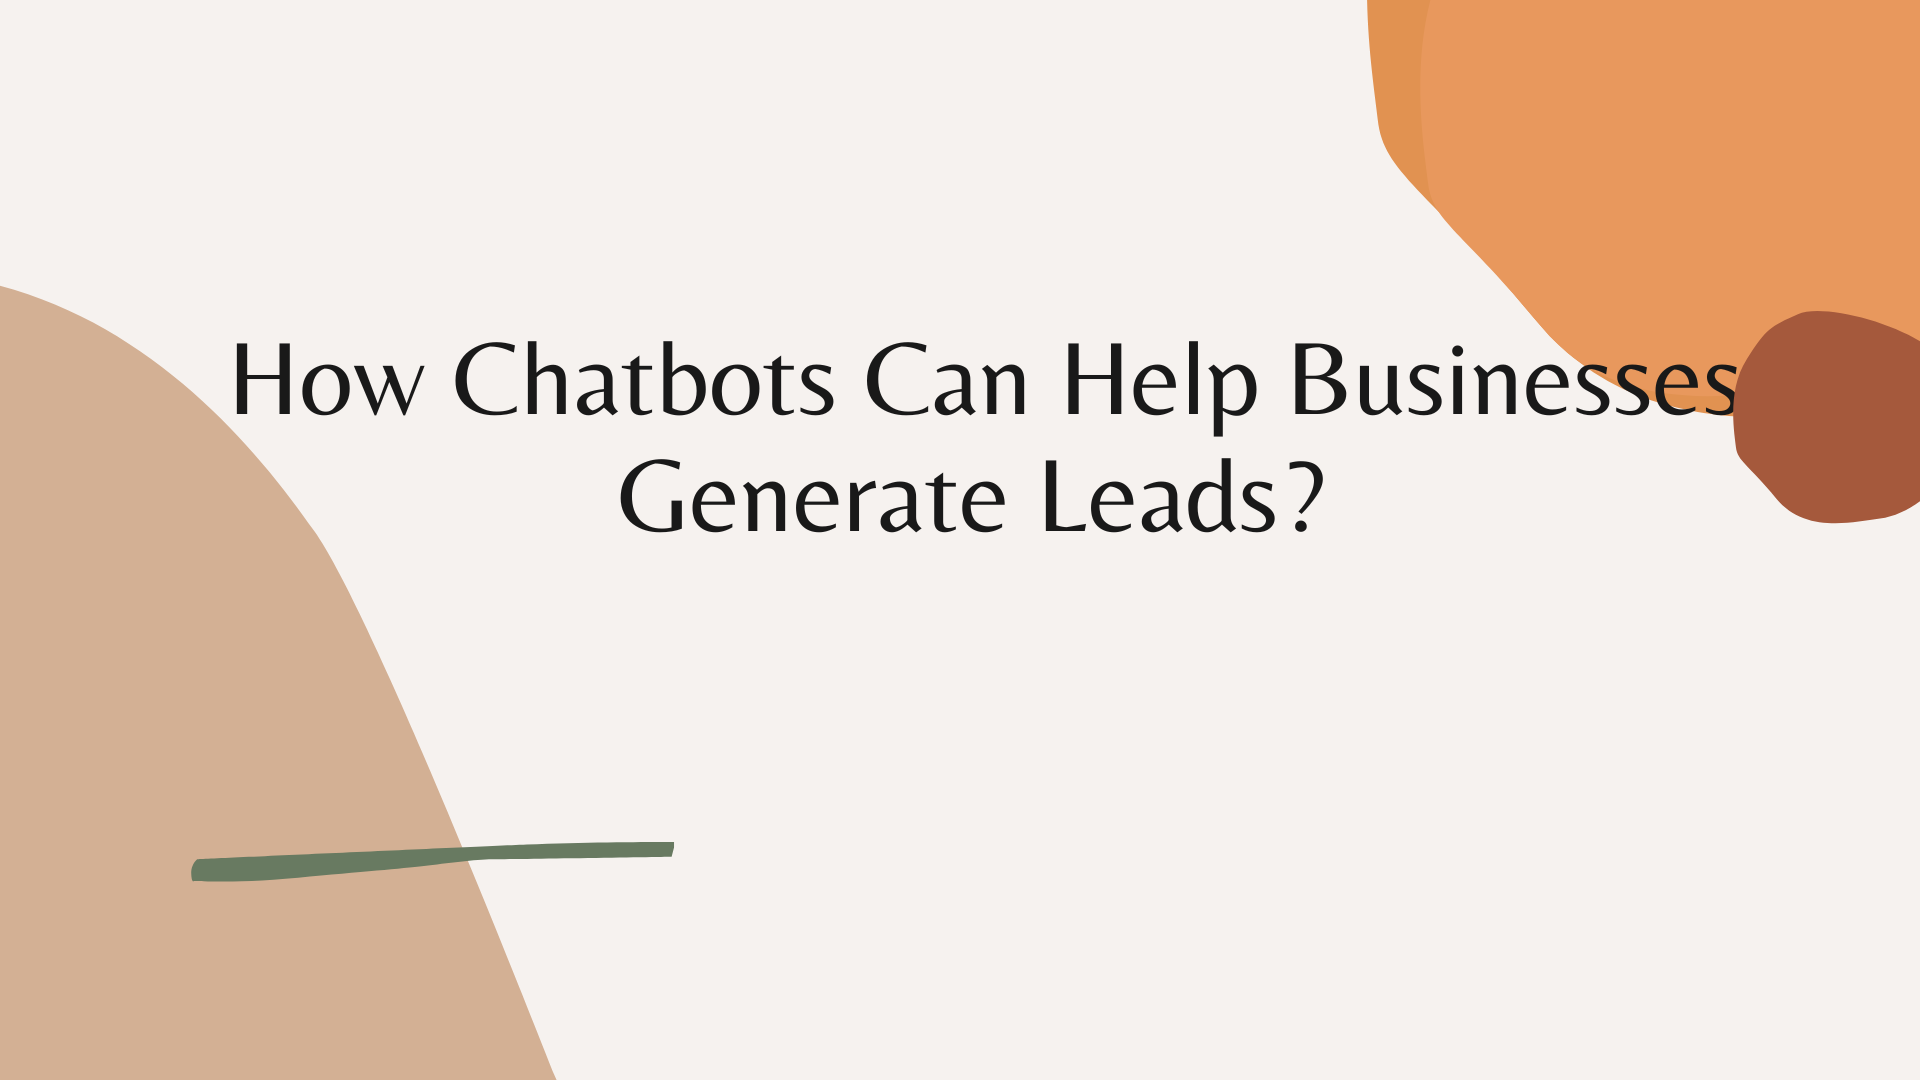 How Chatbots Can Help Businesses Generate Leads?